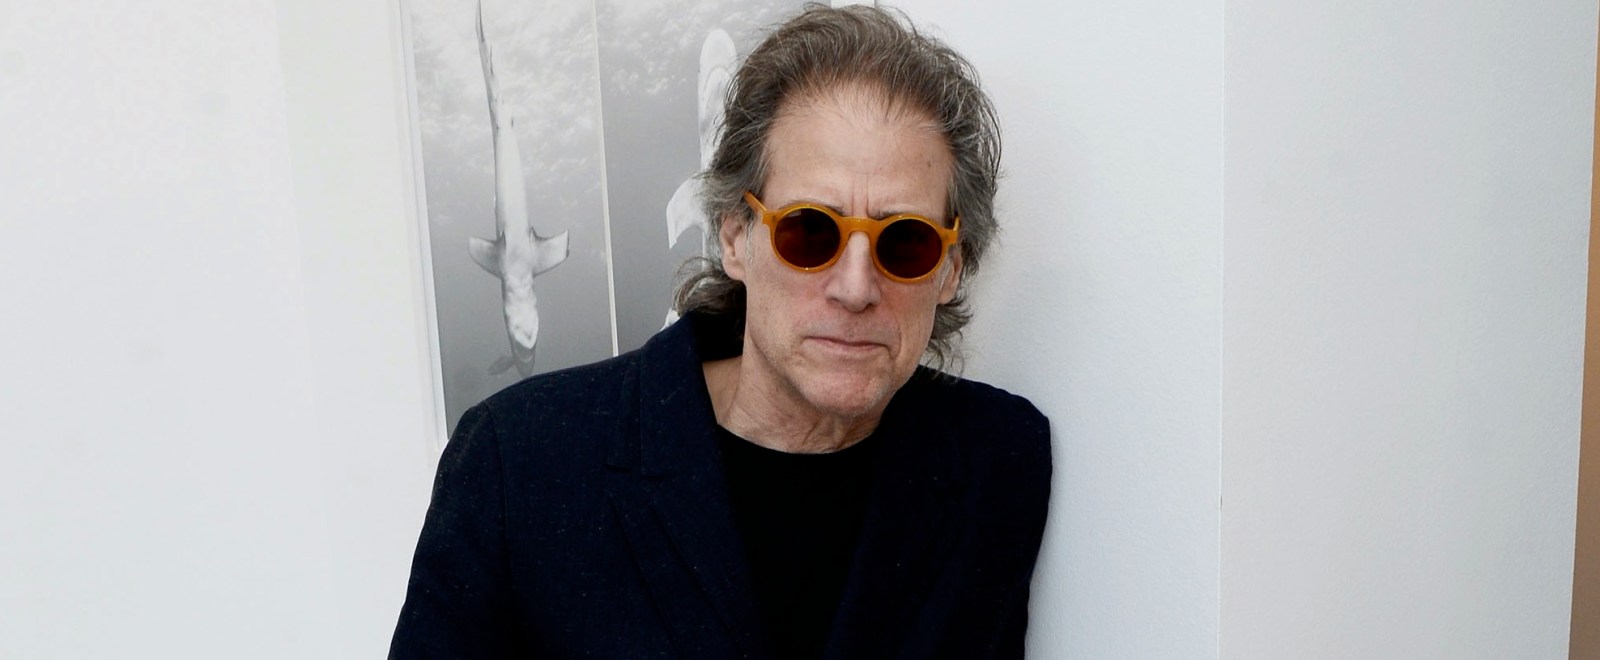 The Official Cause Of Richard Lewis’ Death Has Been Made Public